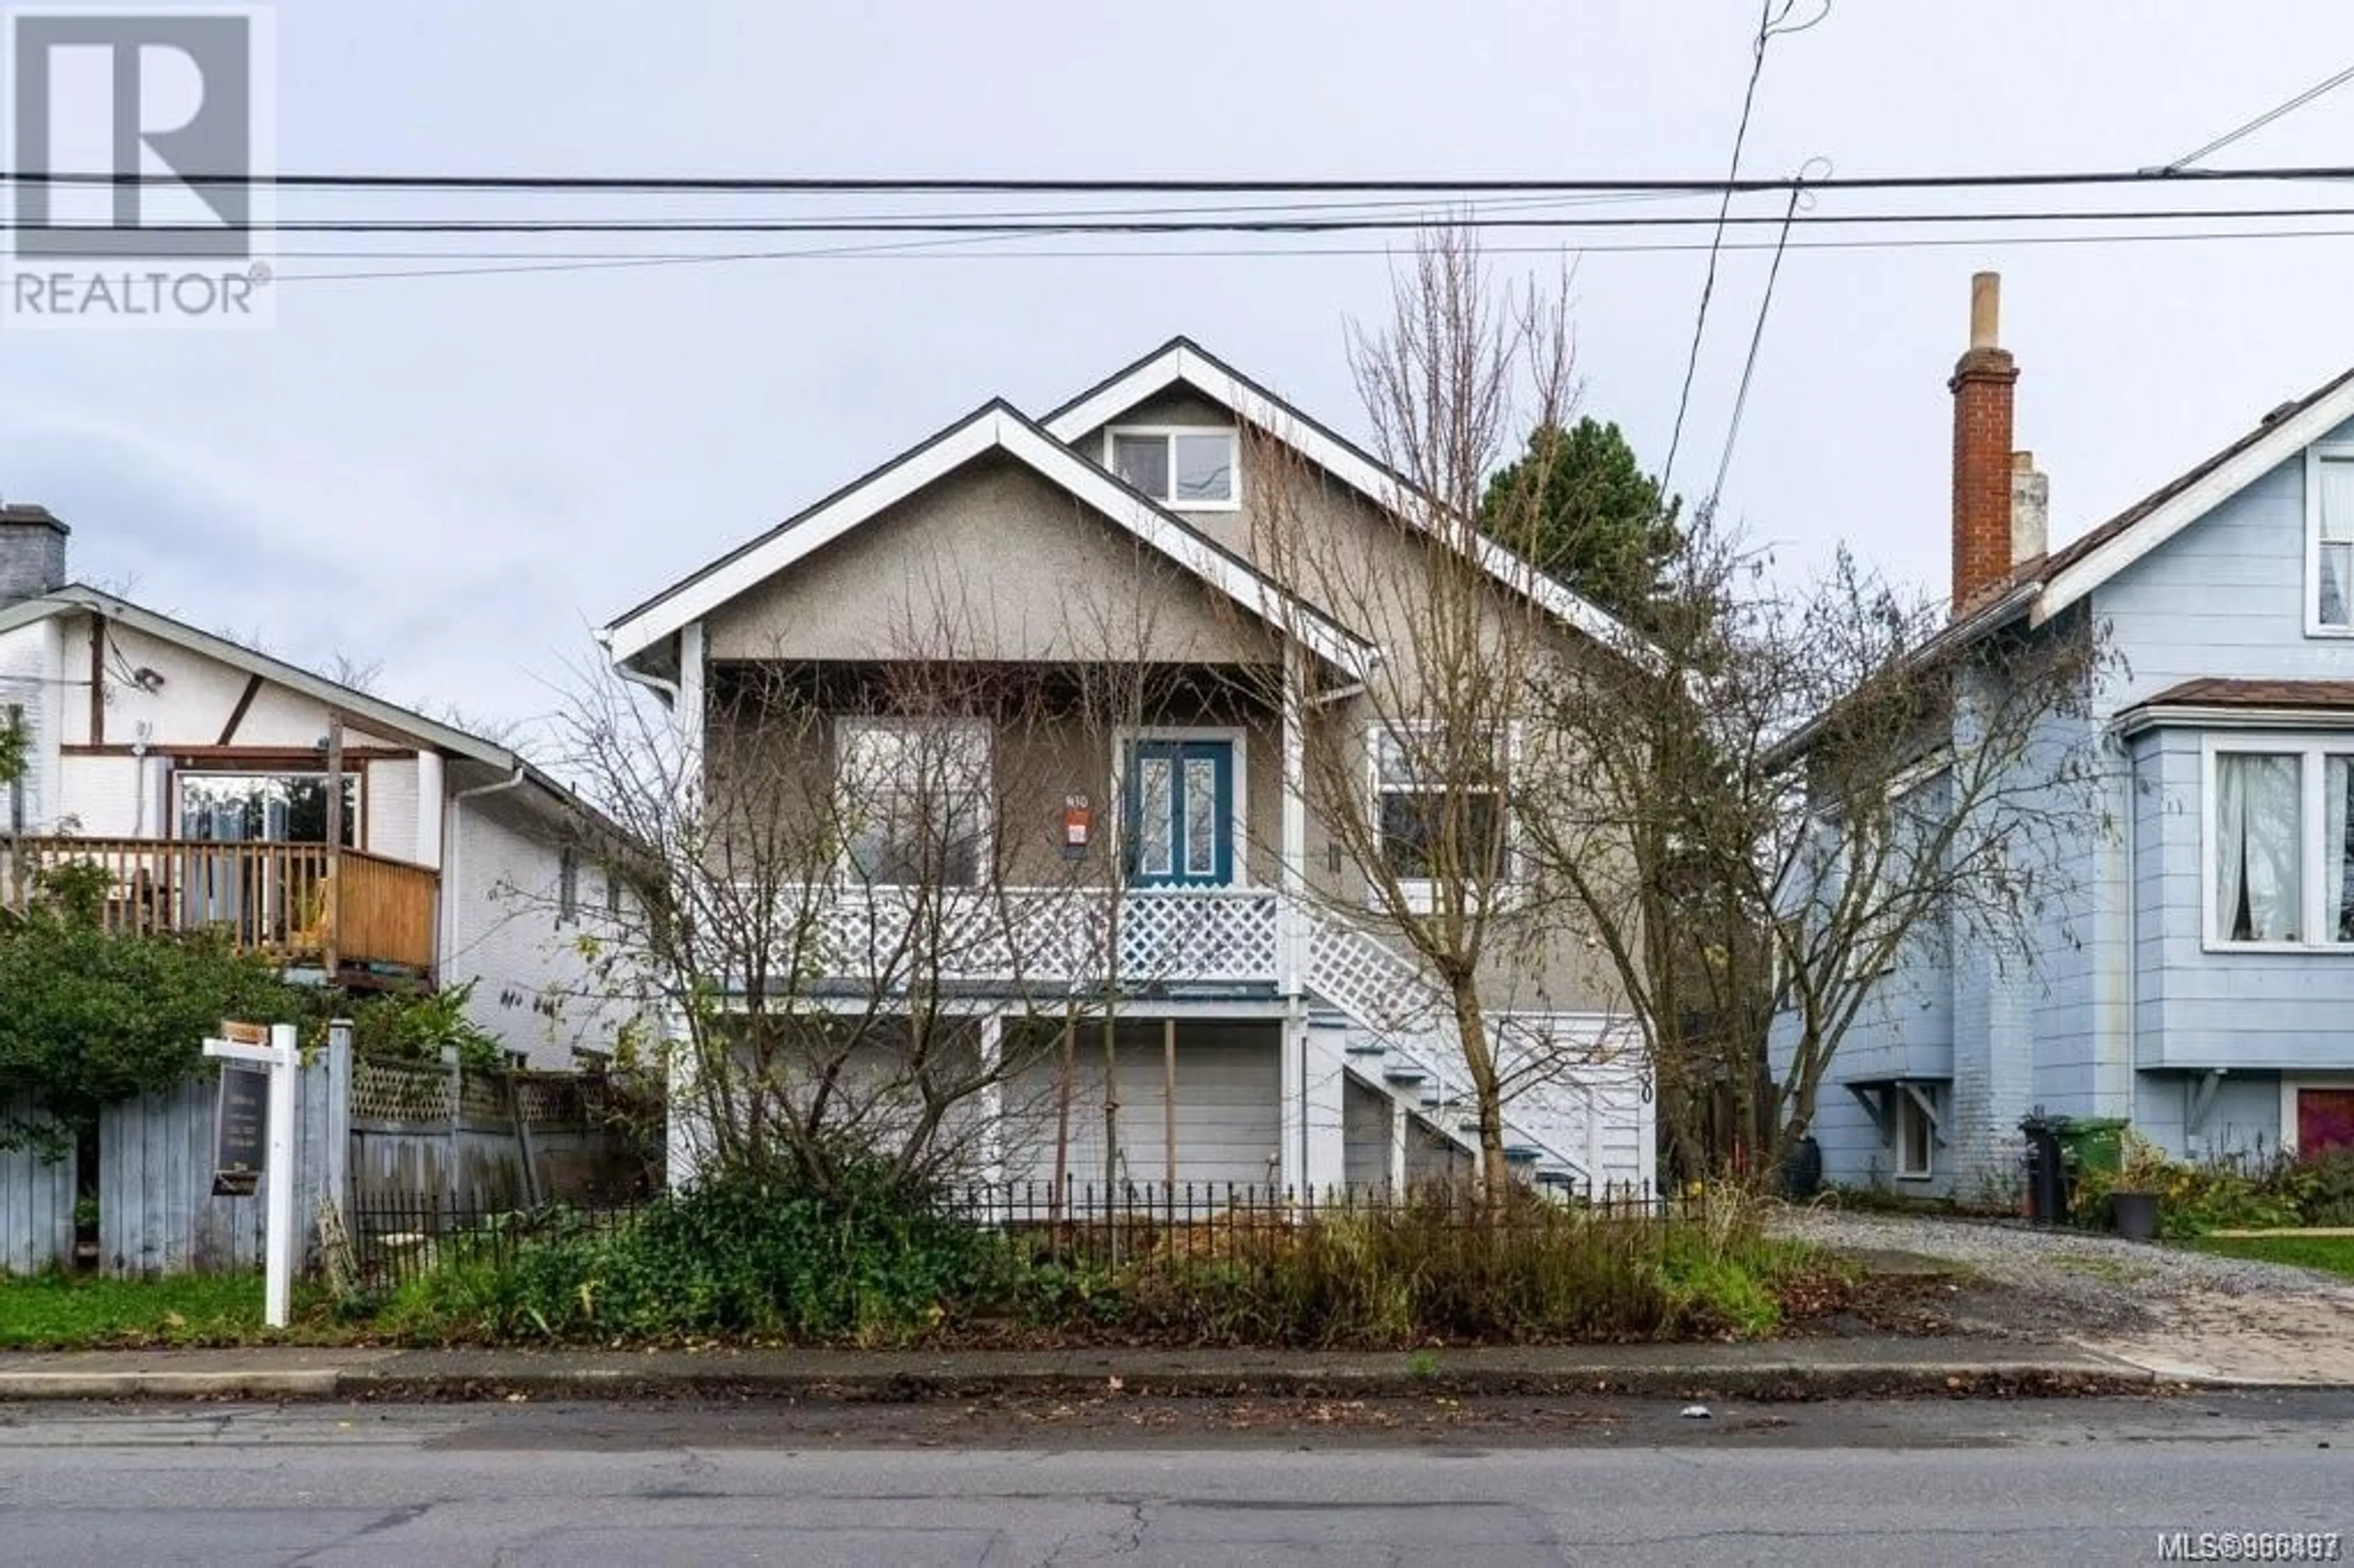 Frontside or backside of a home for 1430 Bay St, Victoria British Columbia V8R2A8